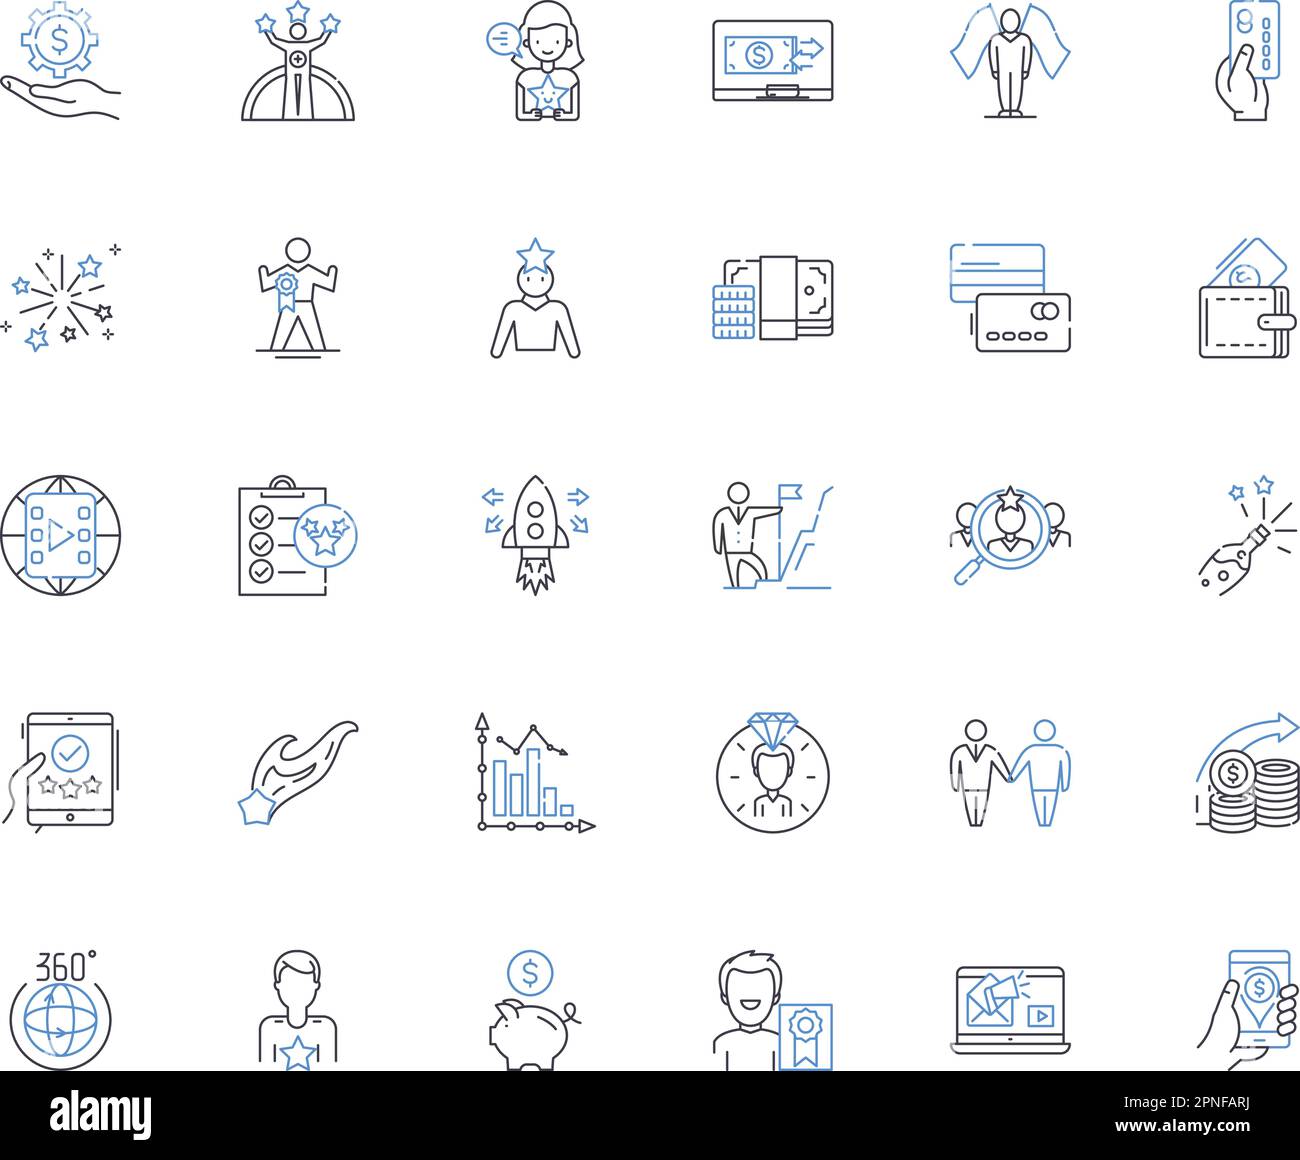 Expense budgeting line icons collection. Allocation, Planning, Control, Forecasting, Analysis, Management, Tracking vector and linear illustration Stock Vector